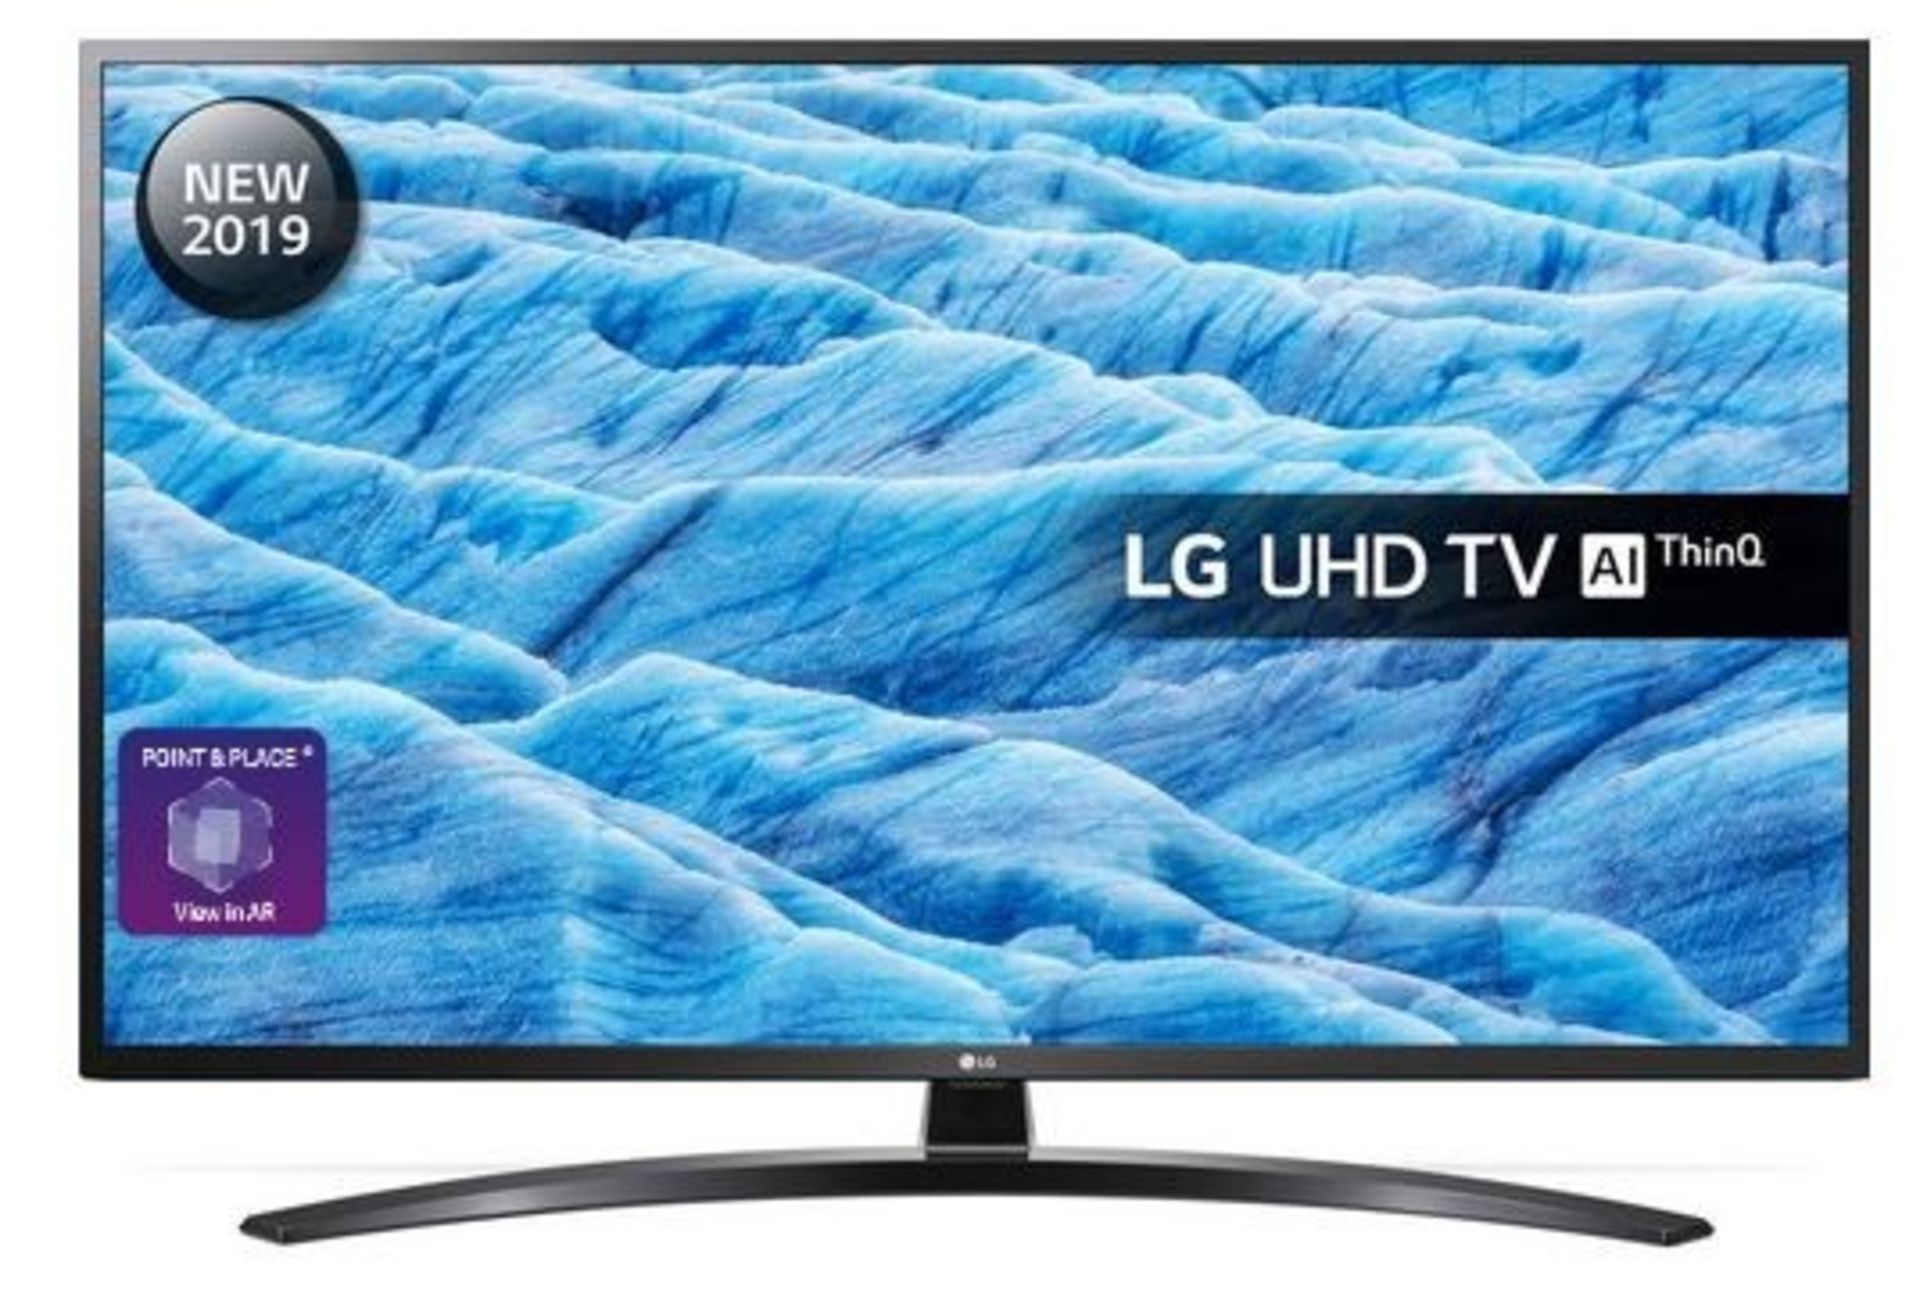 1 BOXED AND UNTESTED LG 55" LED SMART TV / PICTURE AS REFERNECE ONLY / RRP £429.00 (PUBLIC VIEWING